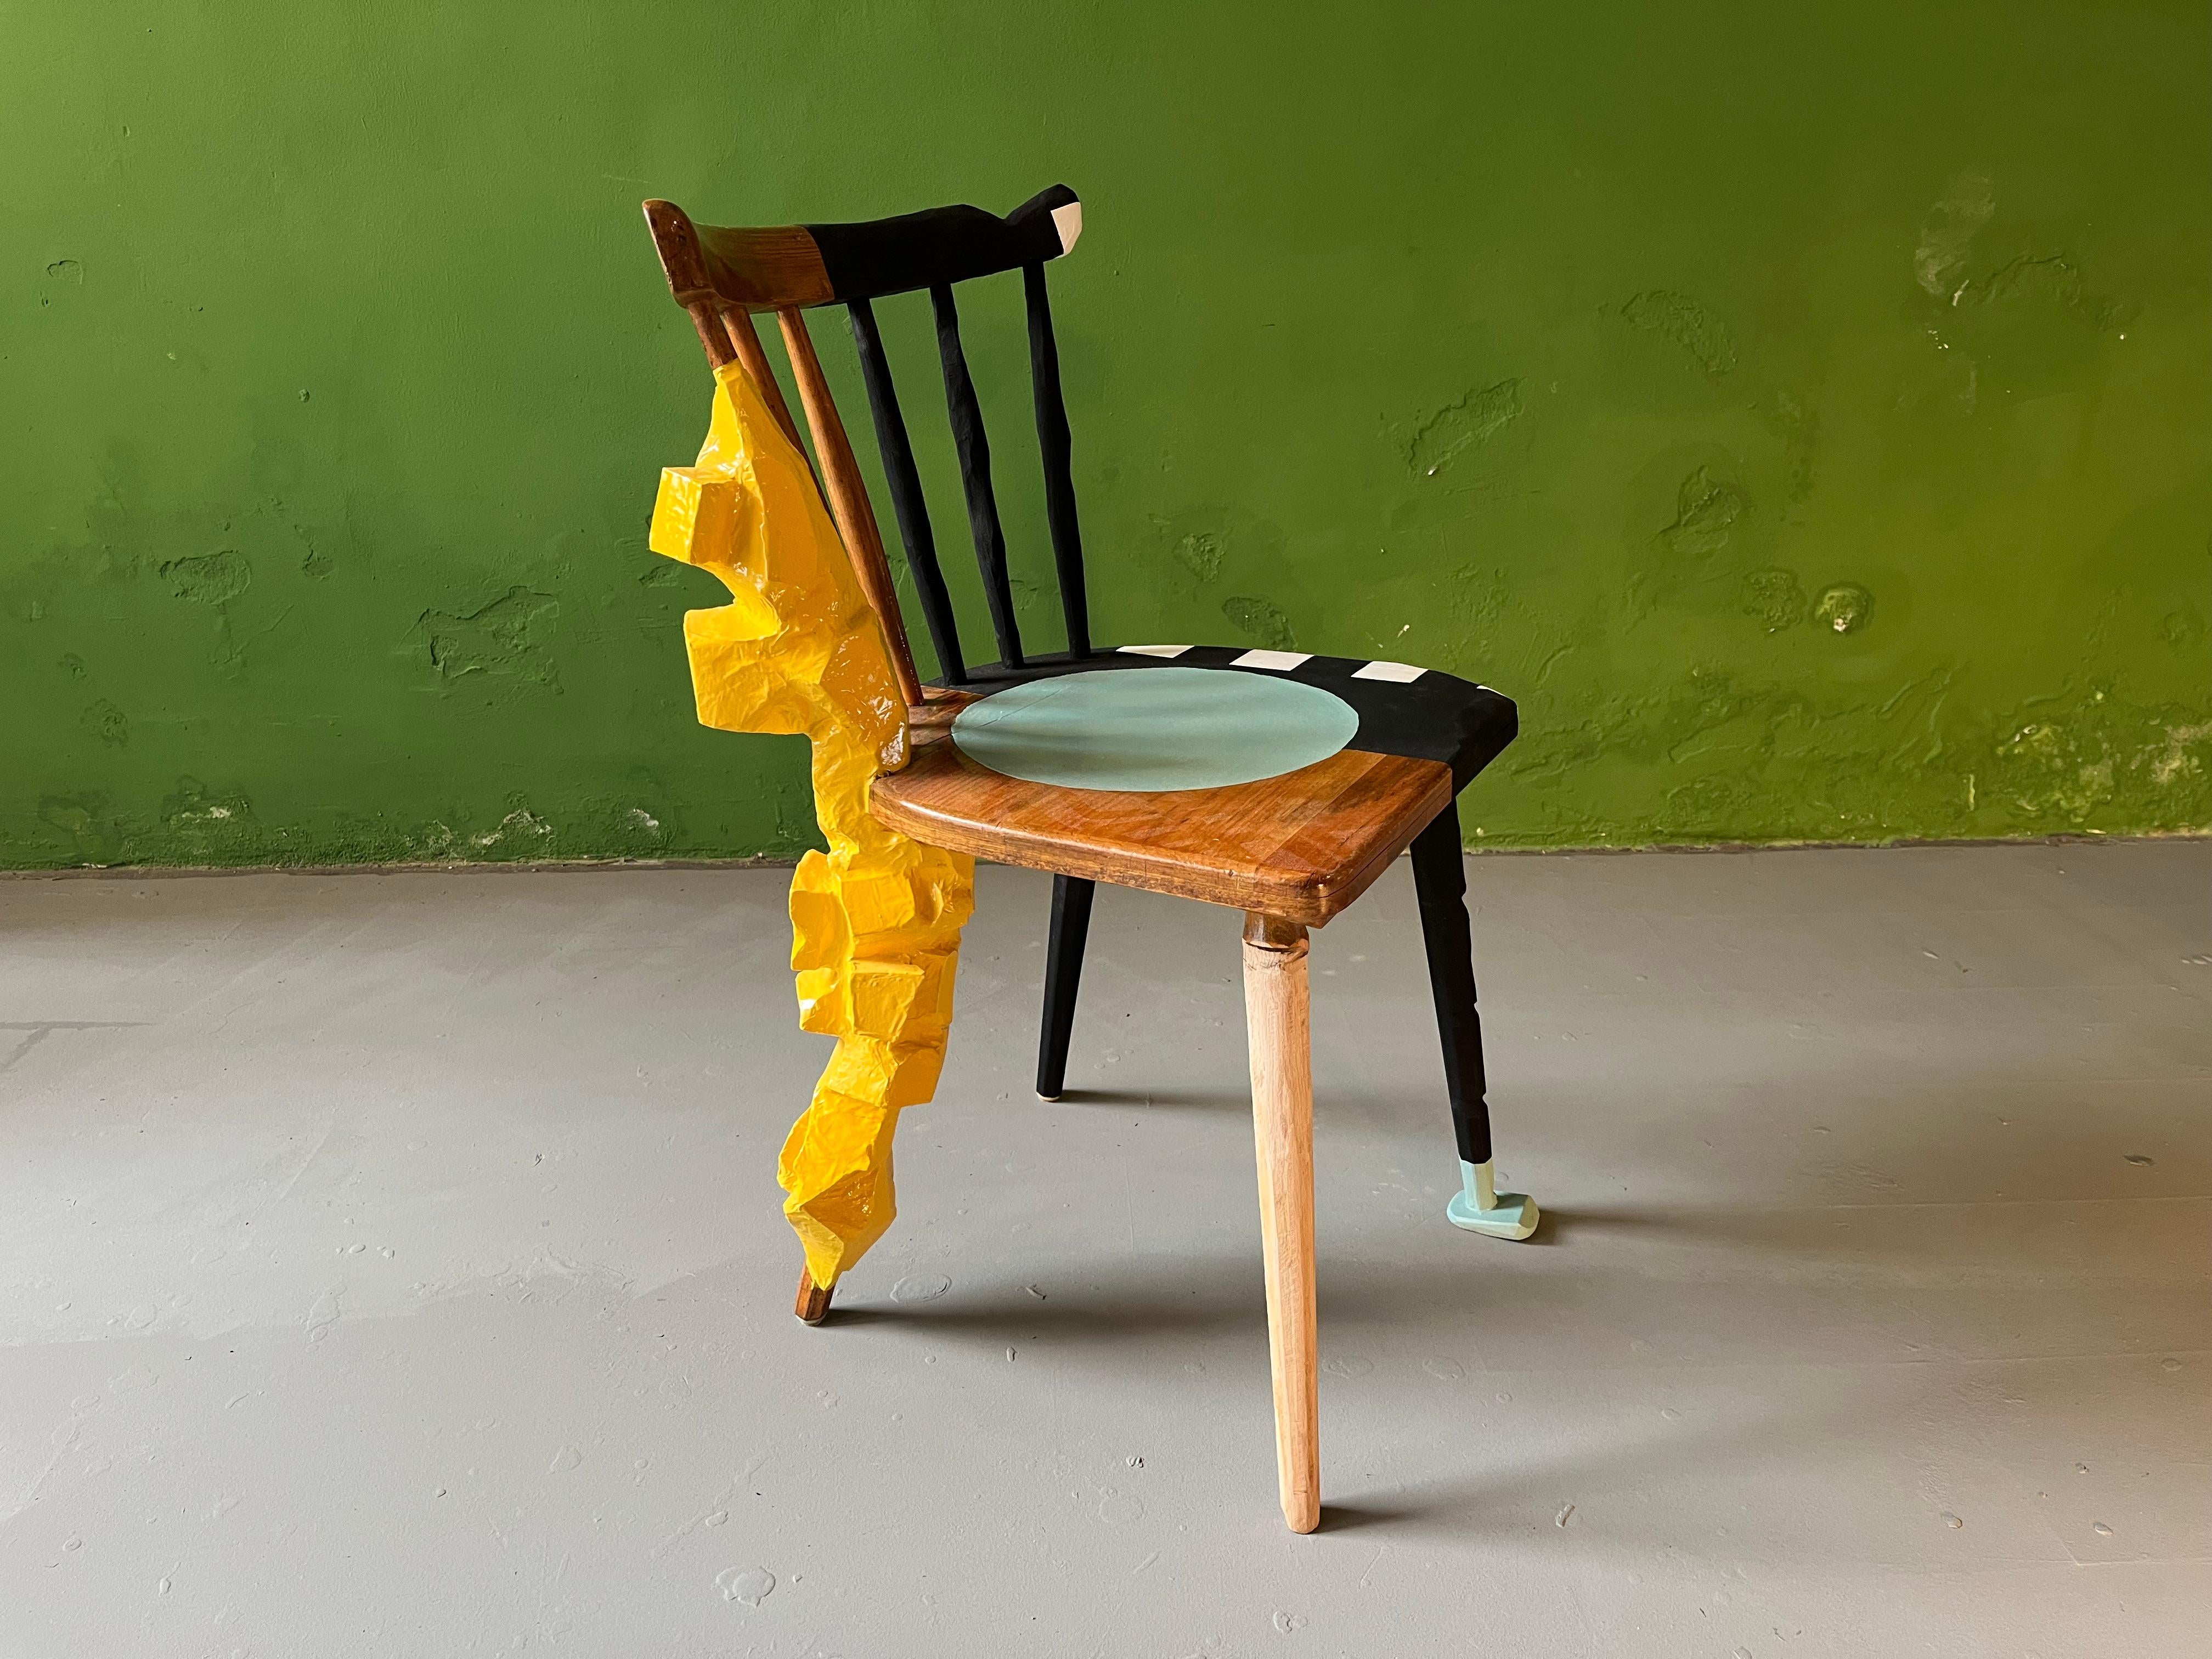 Sculpural design chair. Traditional bavarian kitchen chair contemporized, additional sculpural leg added, re-shaped, painted and multi-lacquered by Markus Friedrich Staab.
You can use this chair on a dailly basis or you can see it as a